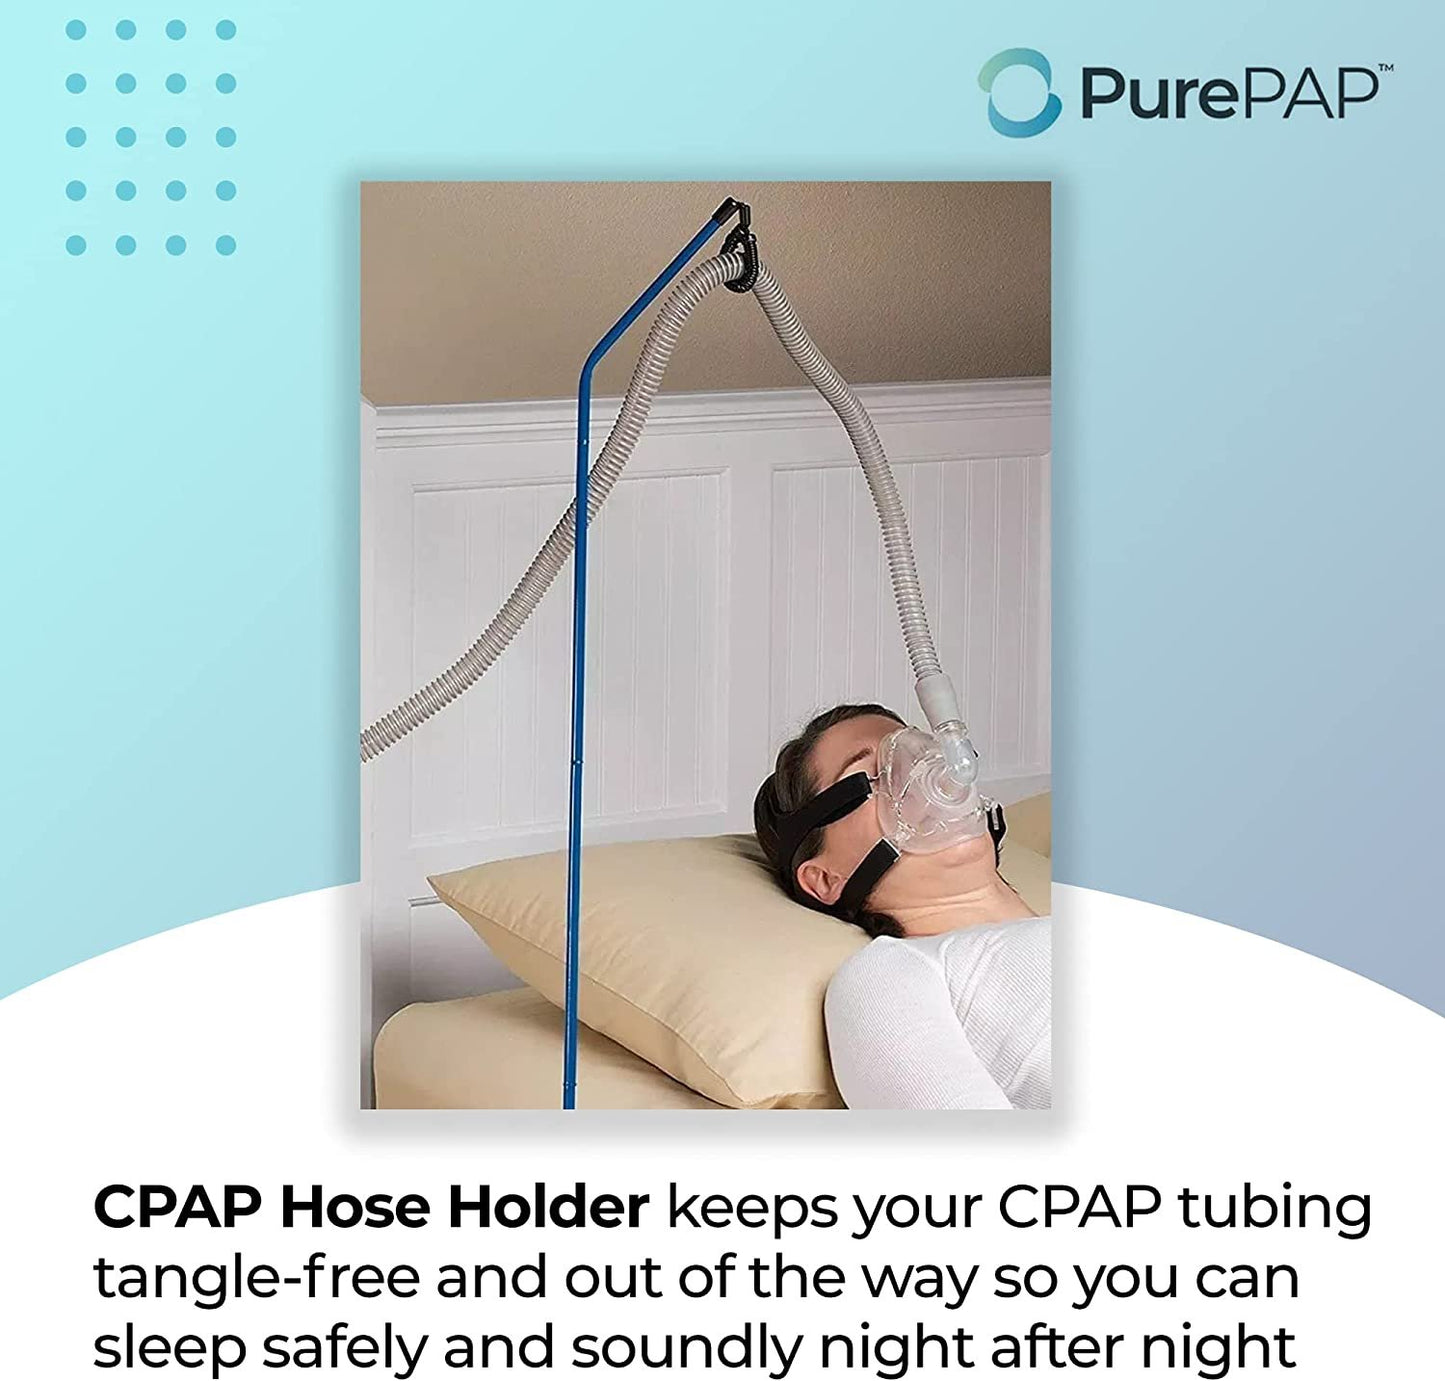 PurePap CPAP Hose Holder for Sleeping - Tangle-Free CPAP Hose Hanger - Adjustable Swivel Arm CPAP Accessories - Compact Design CPAP Hose Holder for Bed - Sleeping Accessories